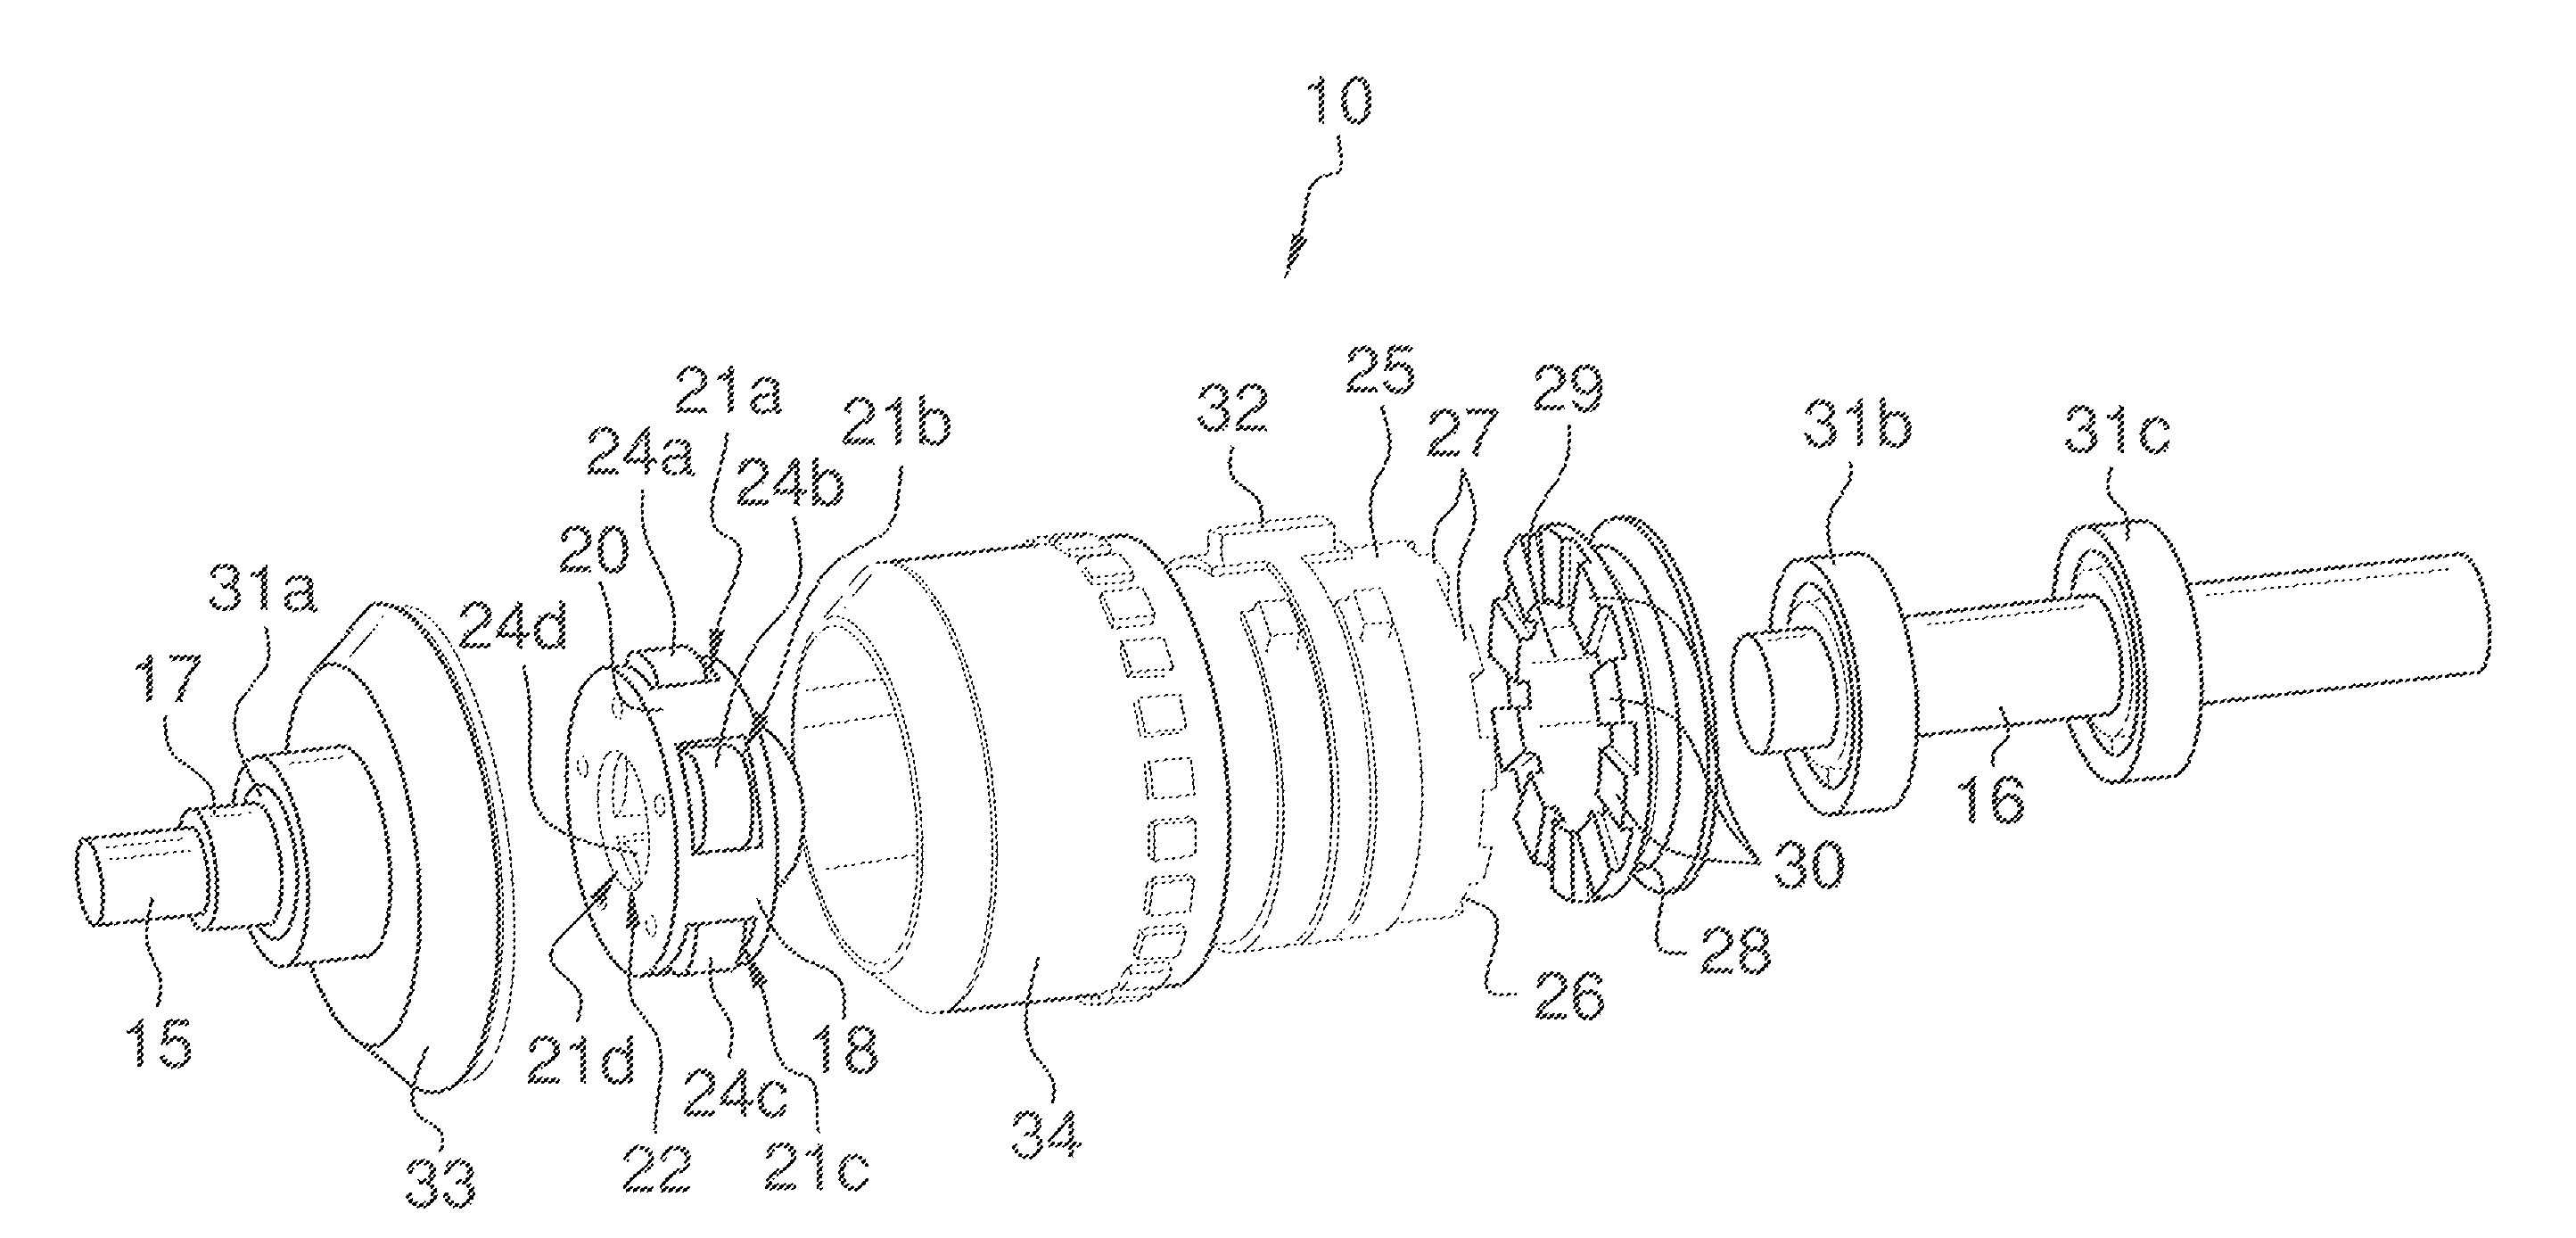 Mechanical power transmission system and method